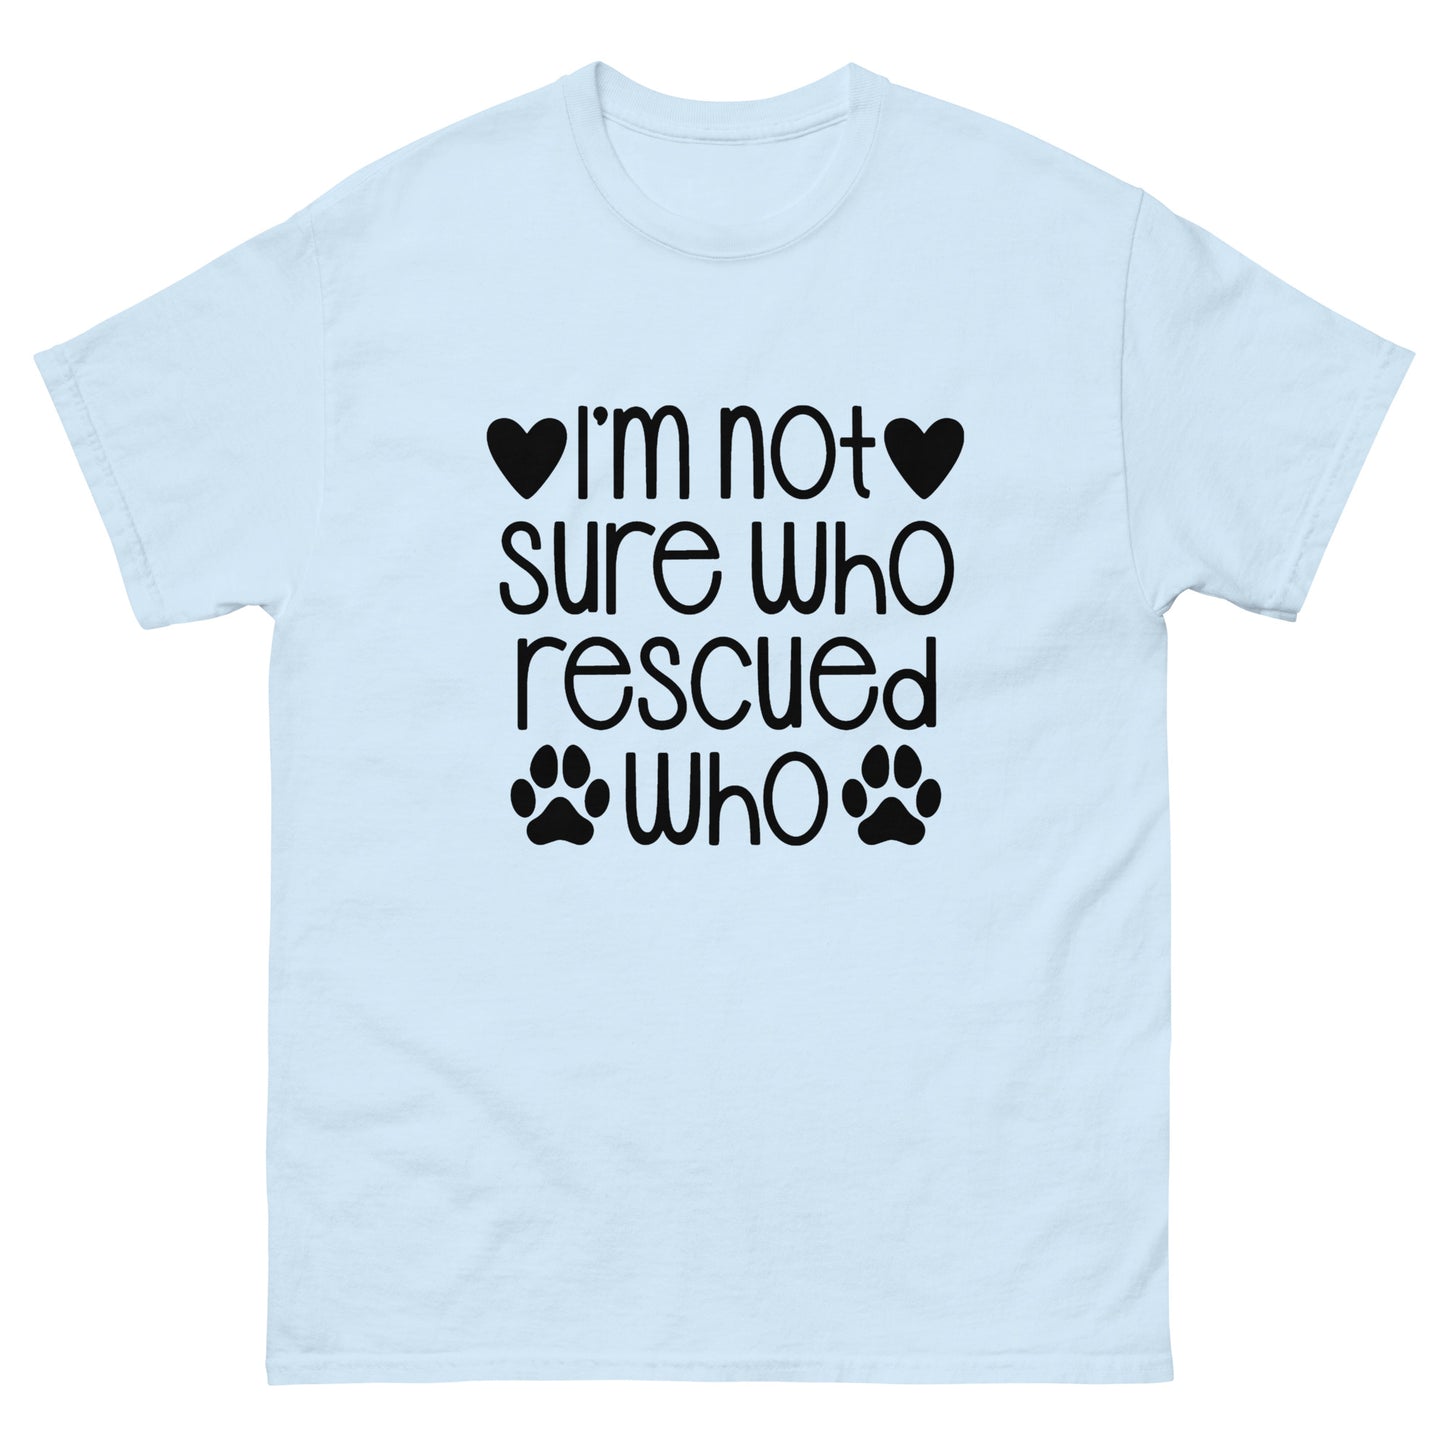 Not Sure Who Rescued Who - classic tee